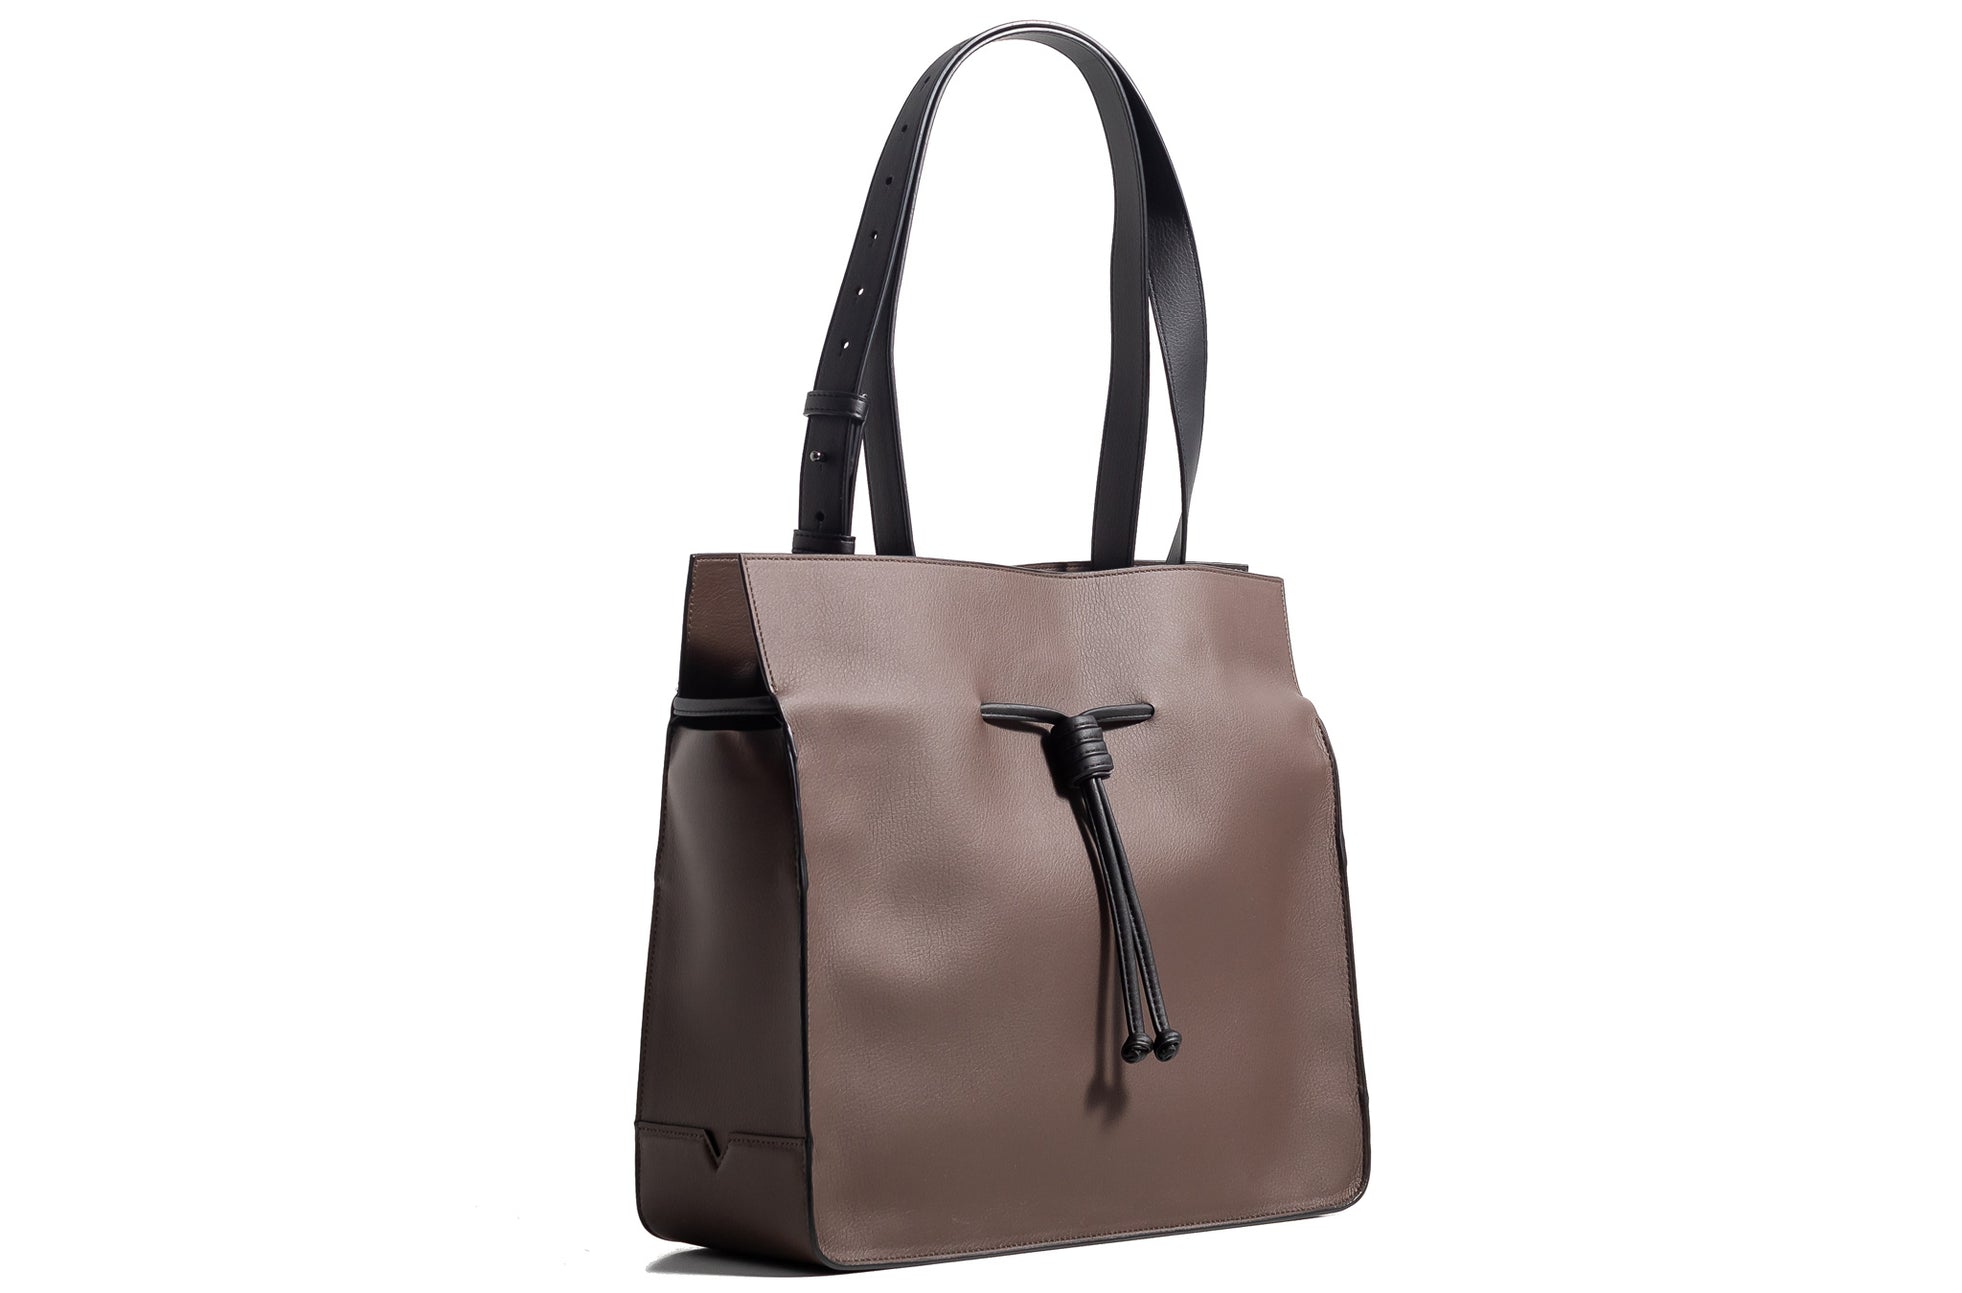 The Medium Shopper in Technik-Leather in Taupe and Black image 3